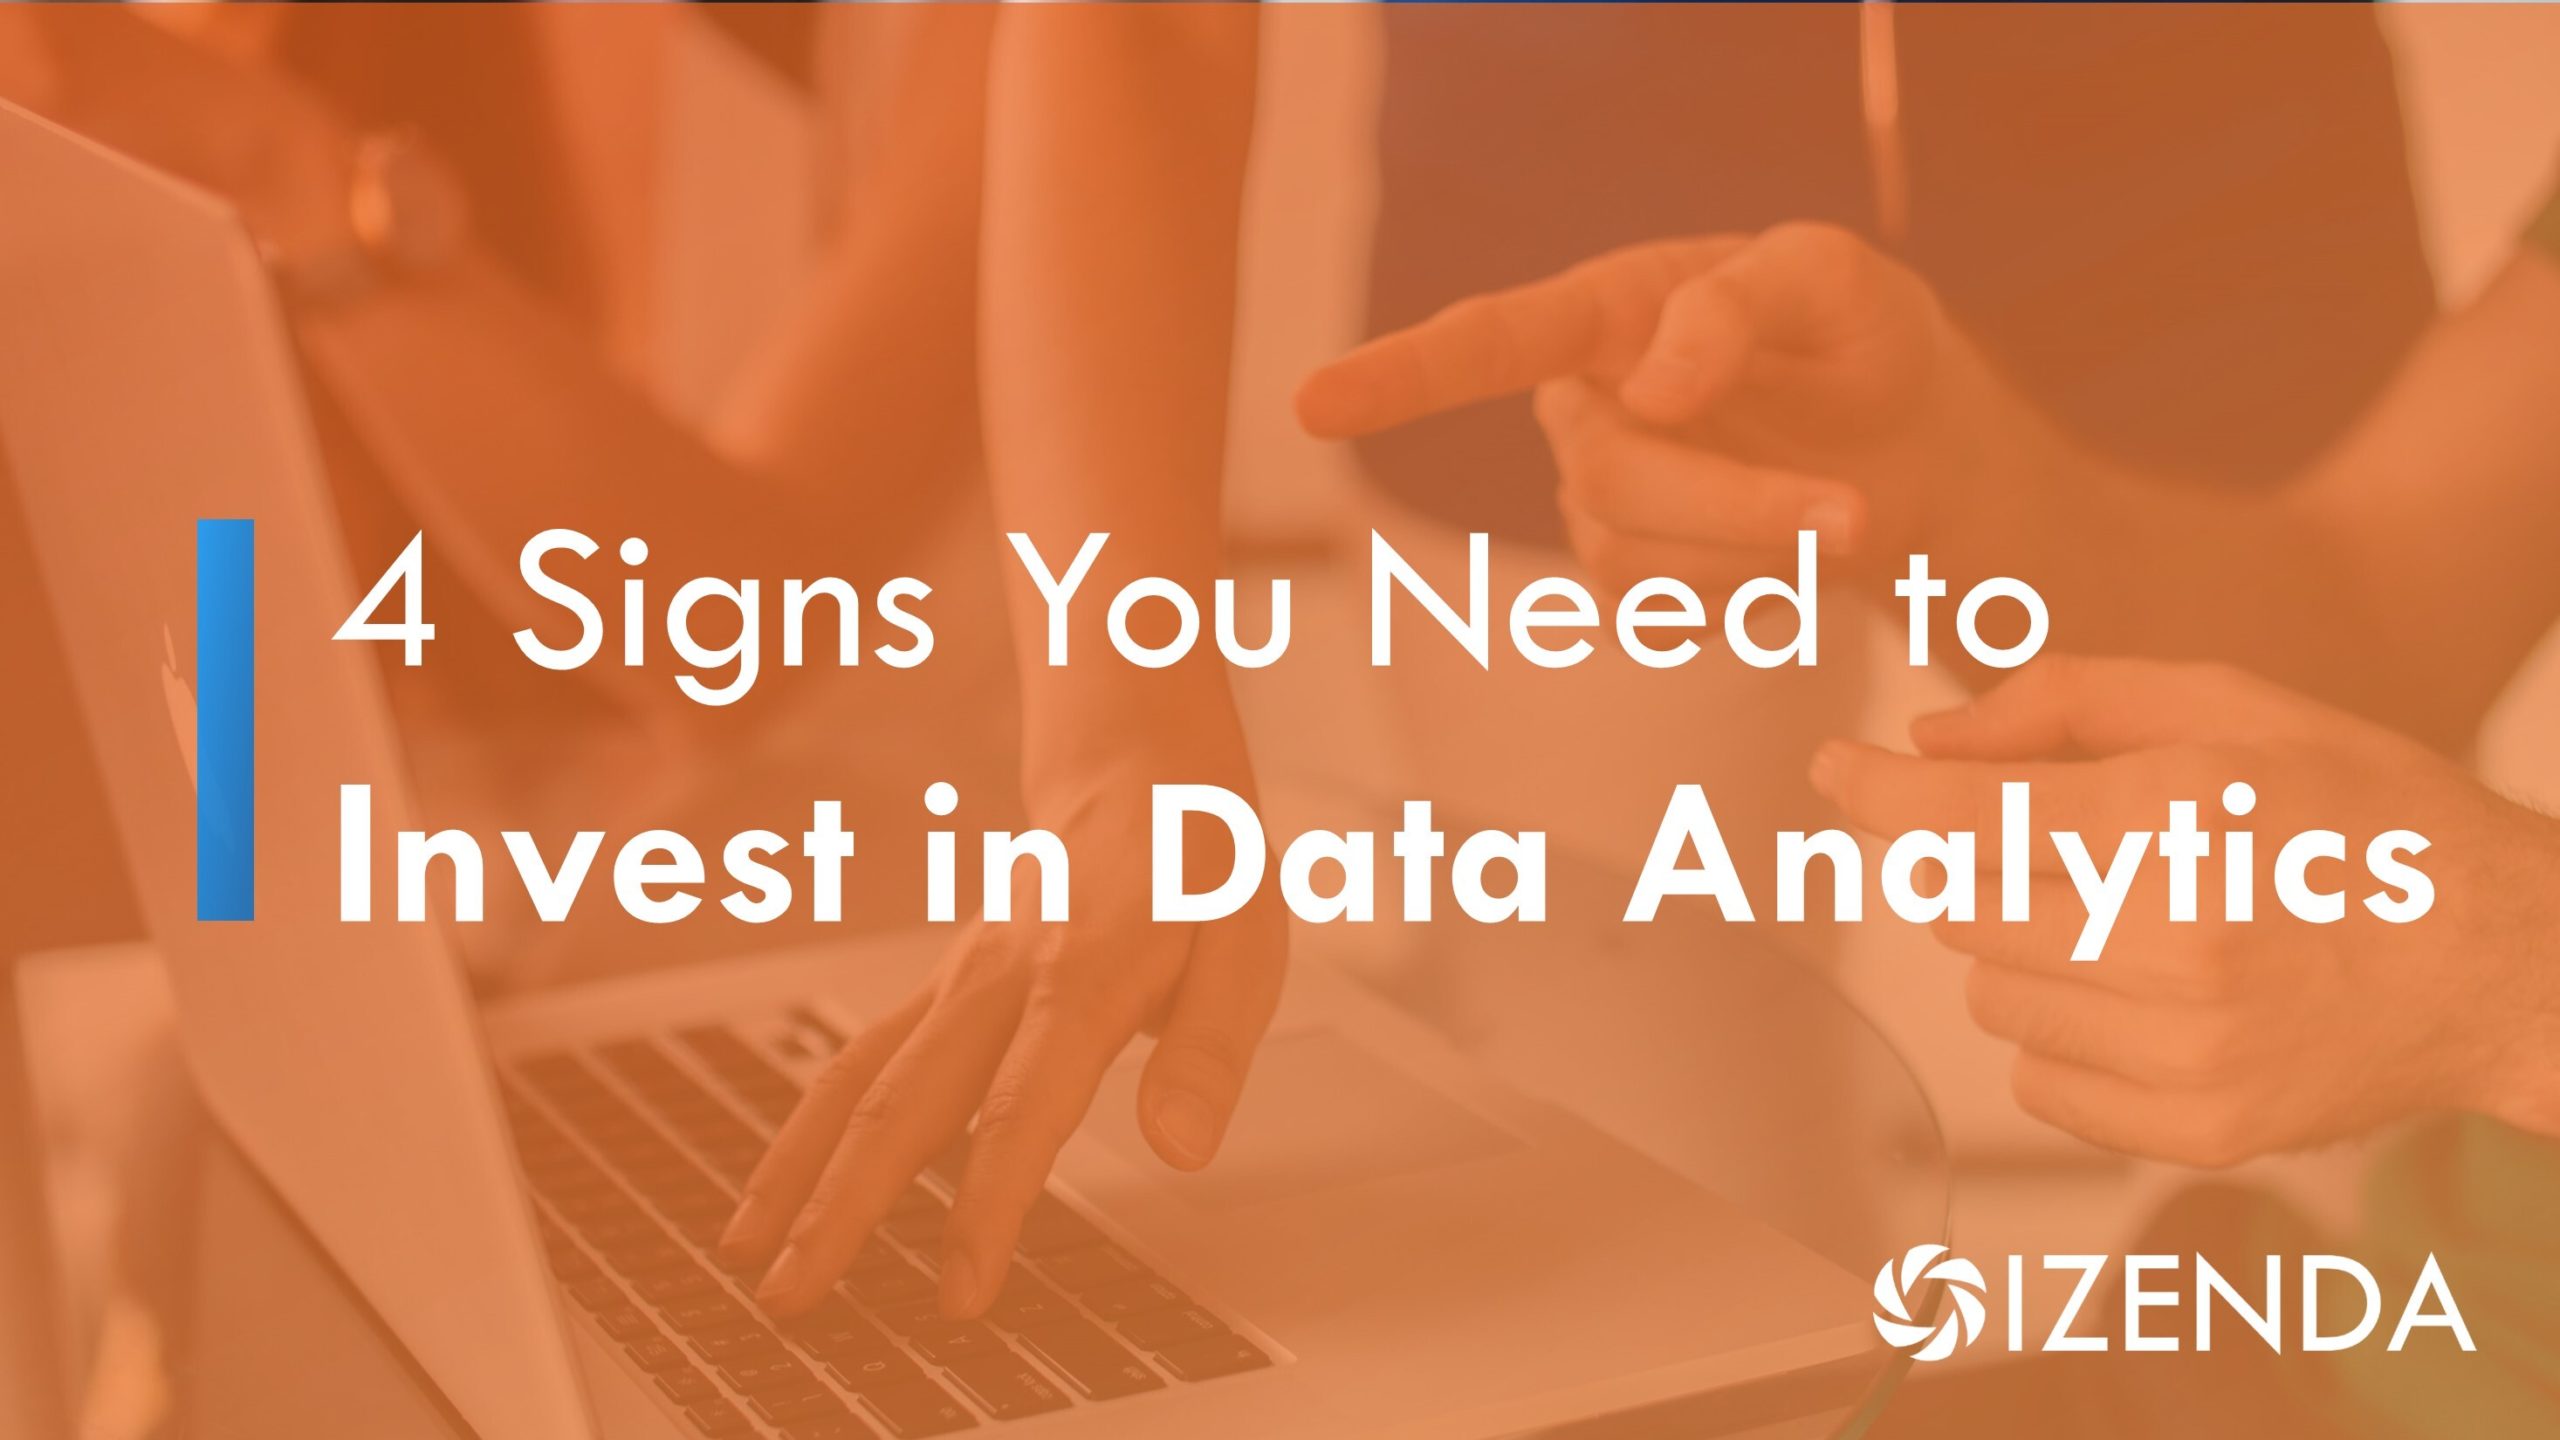 4 signs you need to invest in data analytics